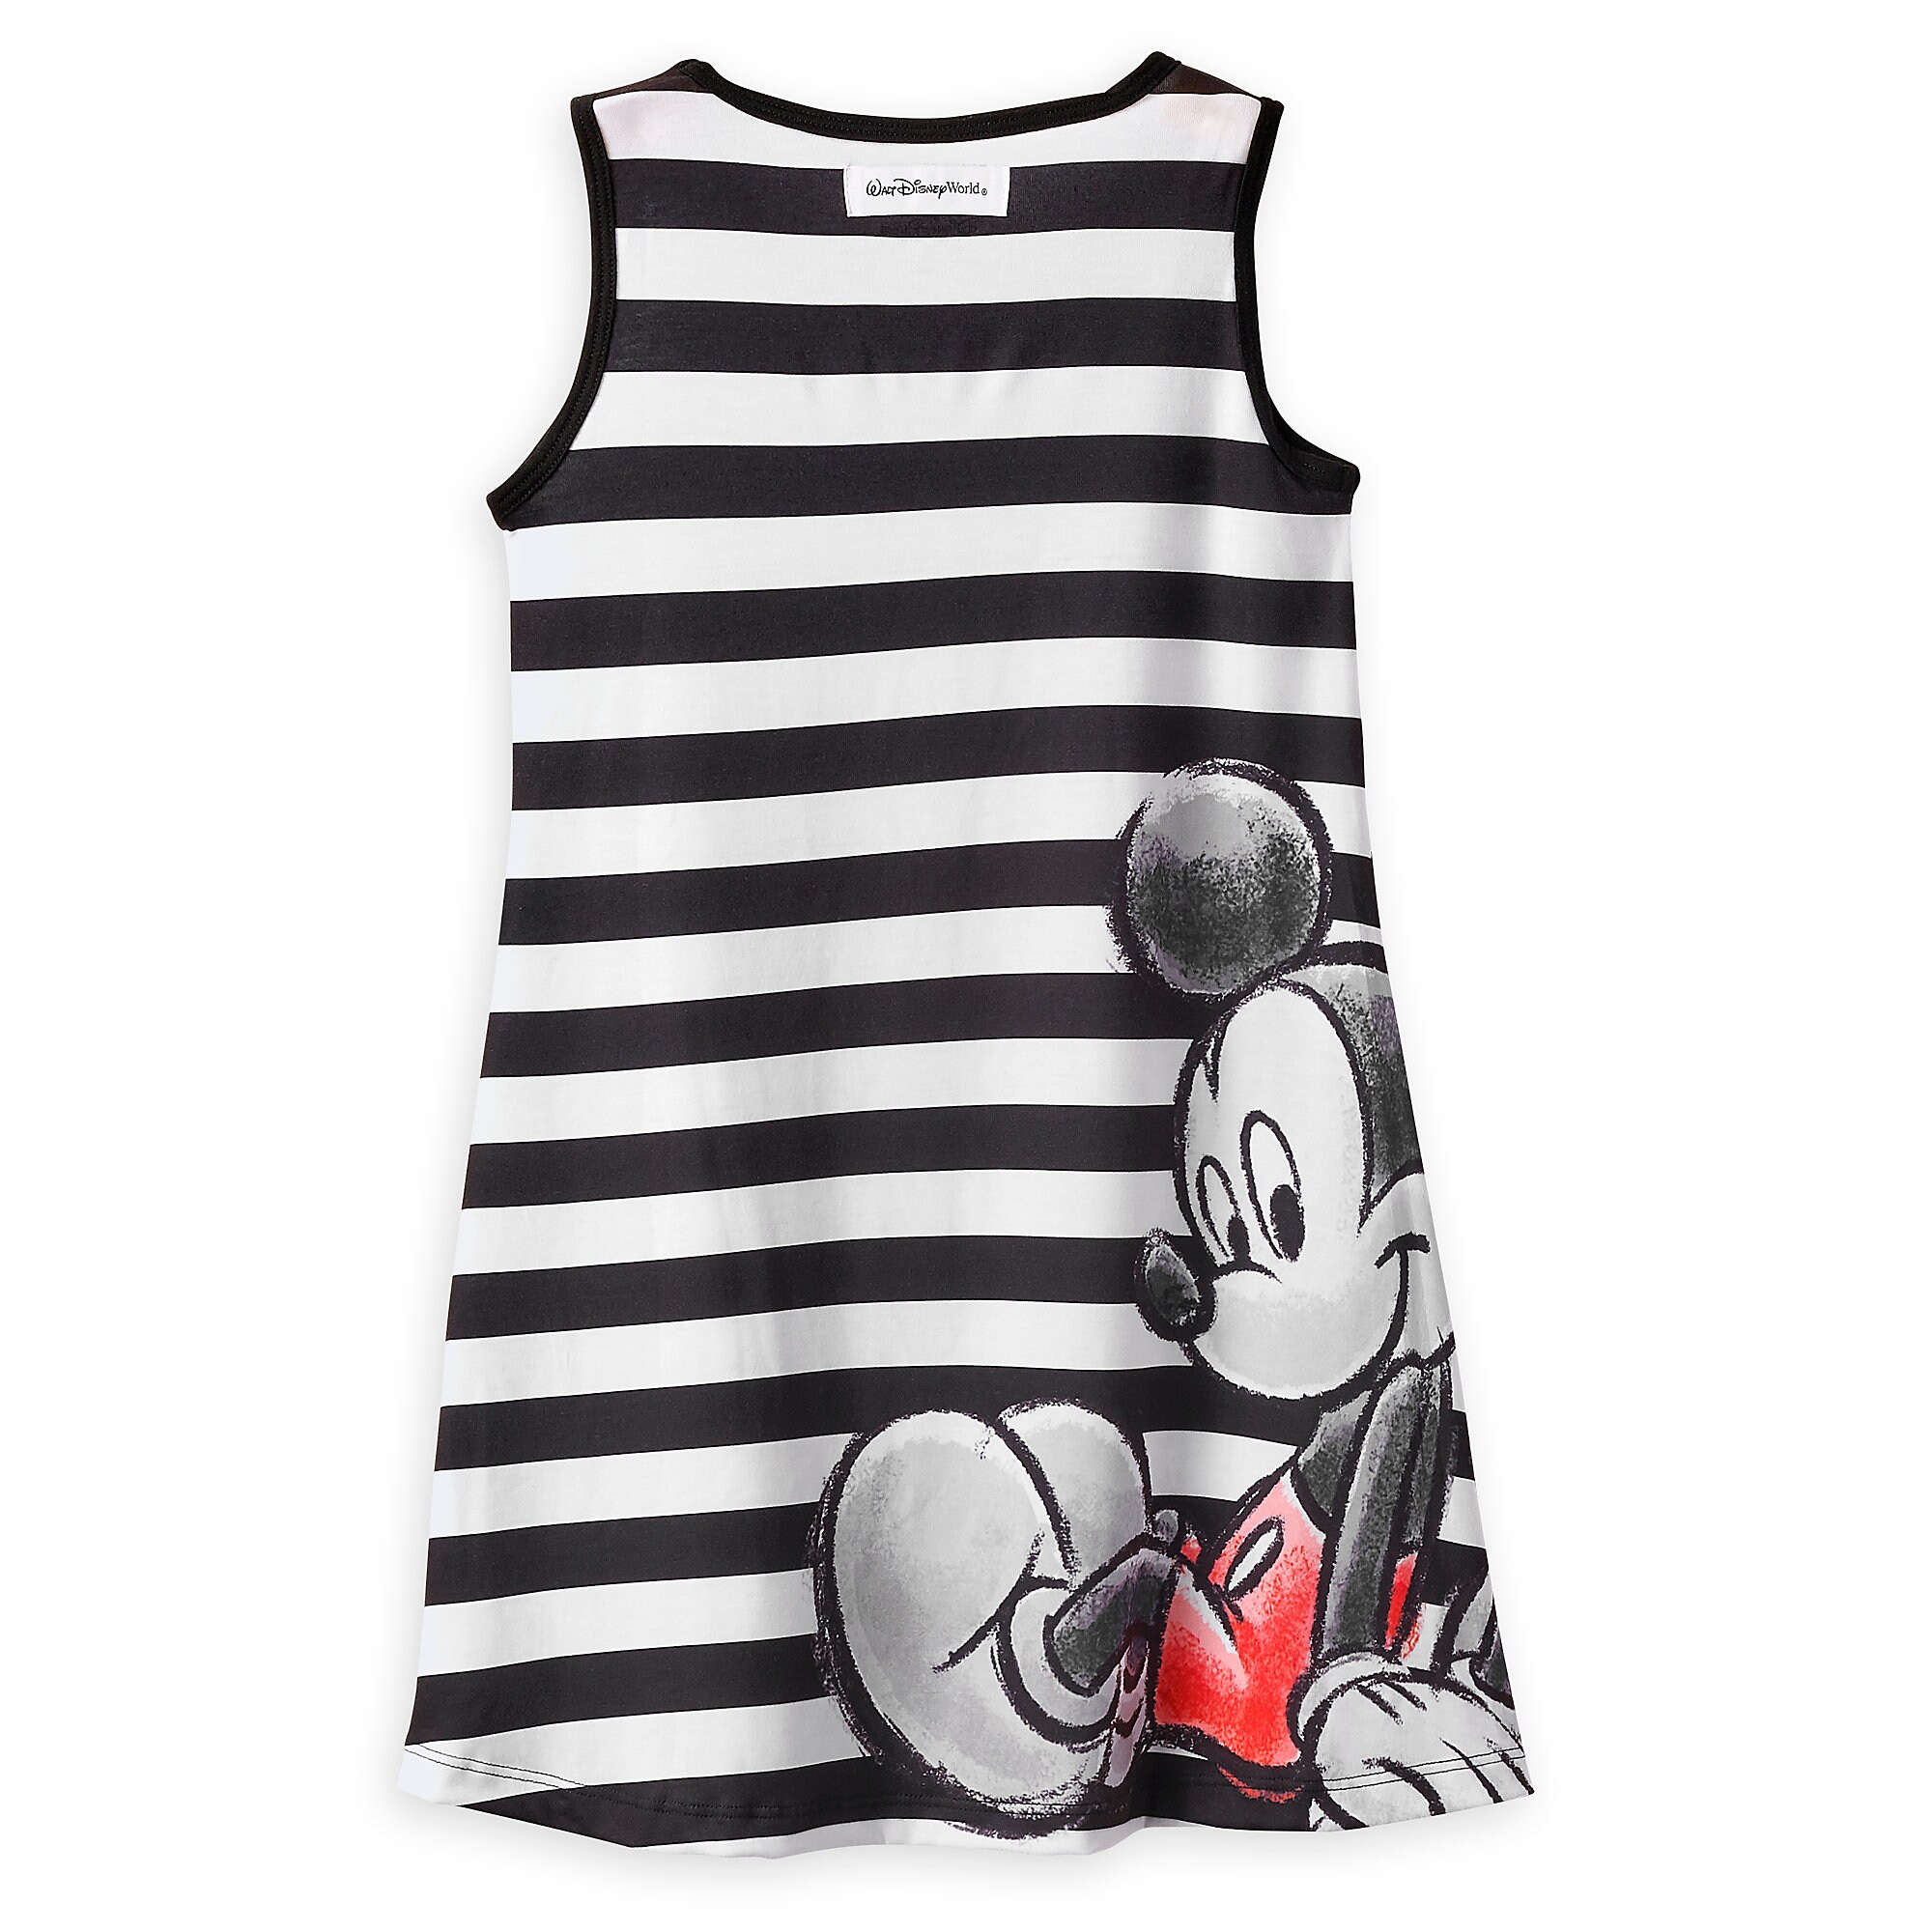 Mickey and Minnie Mouse Striped Dress for Girls - Black